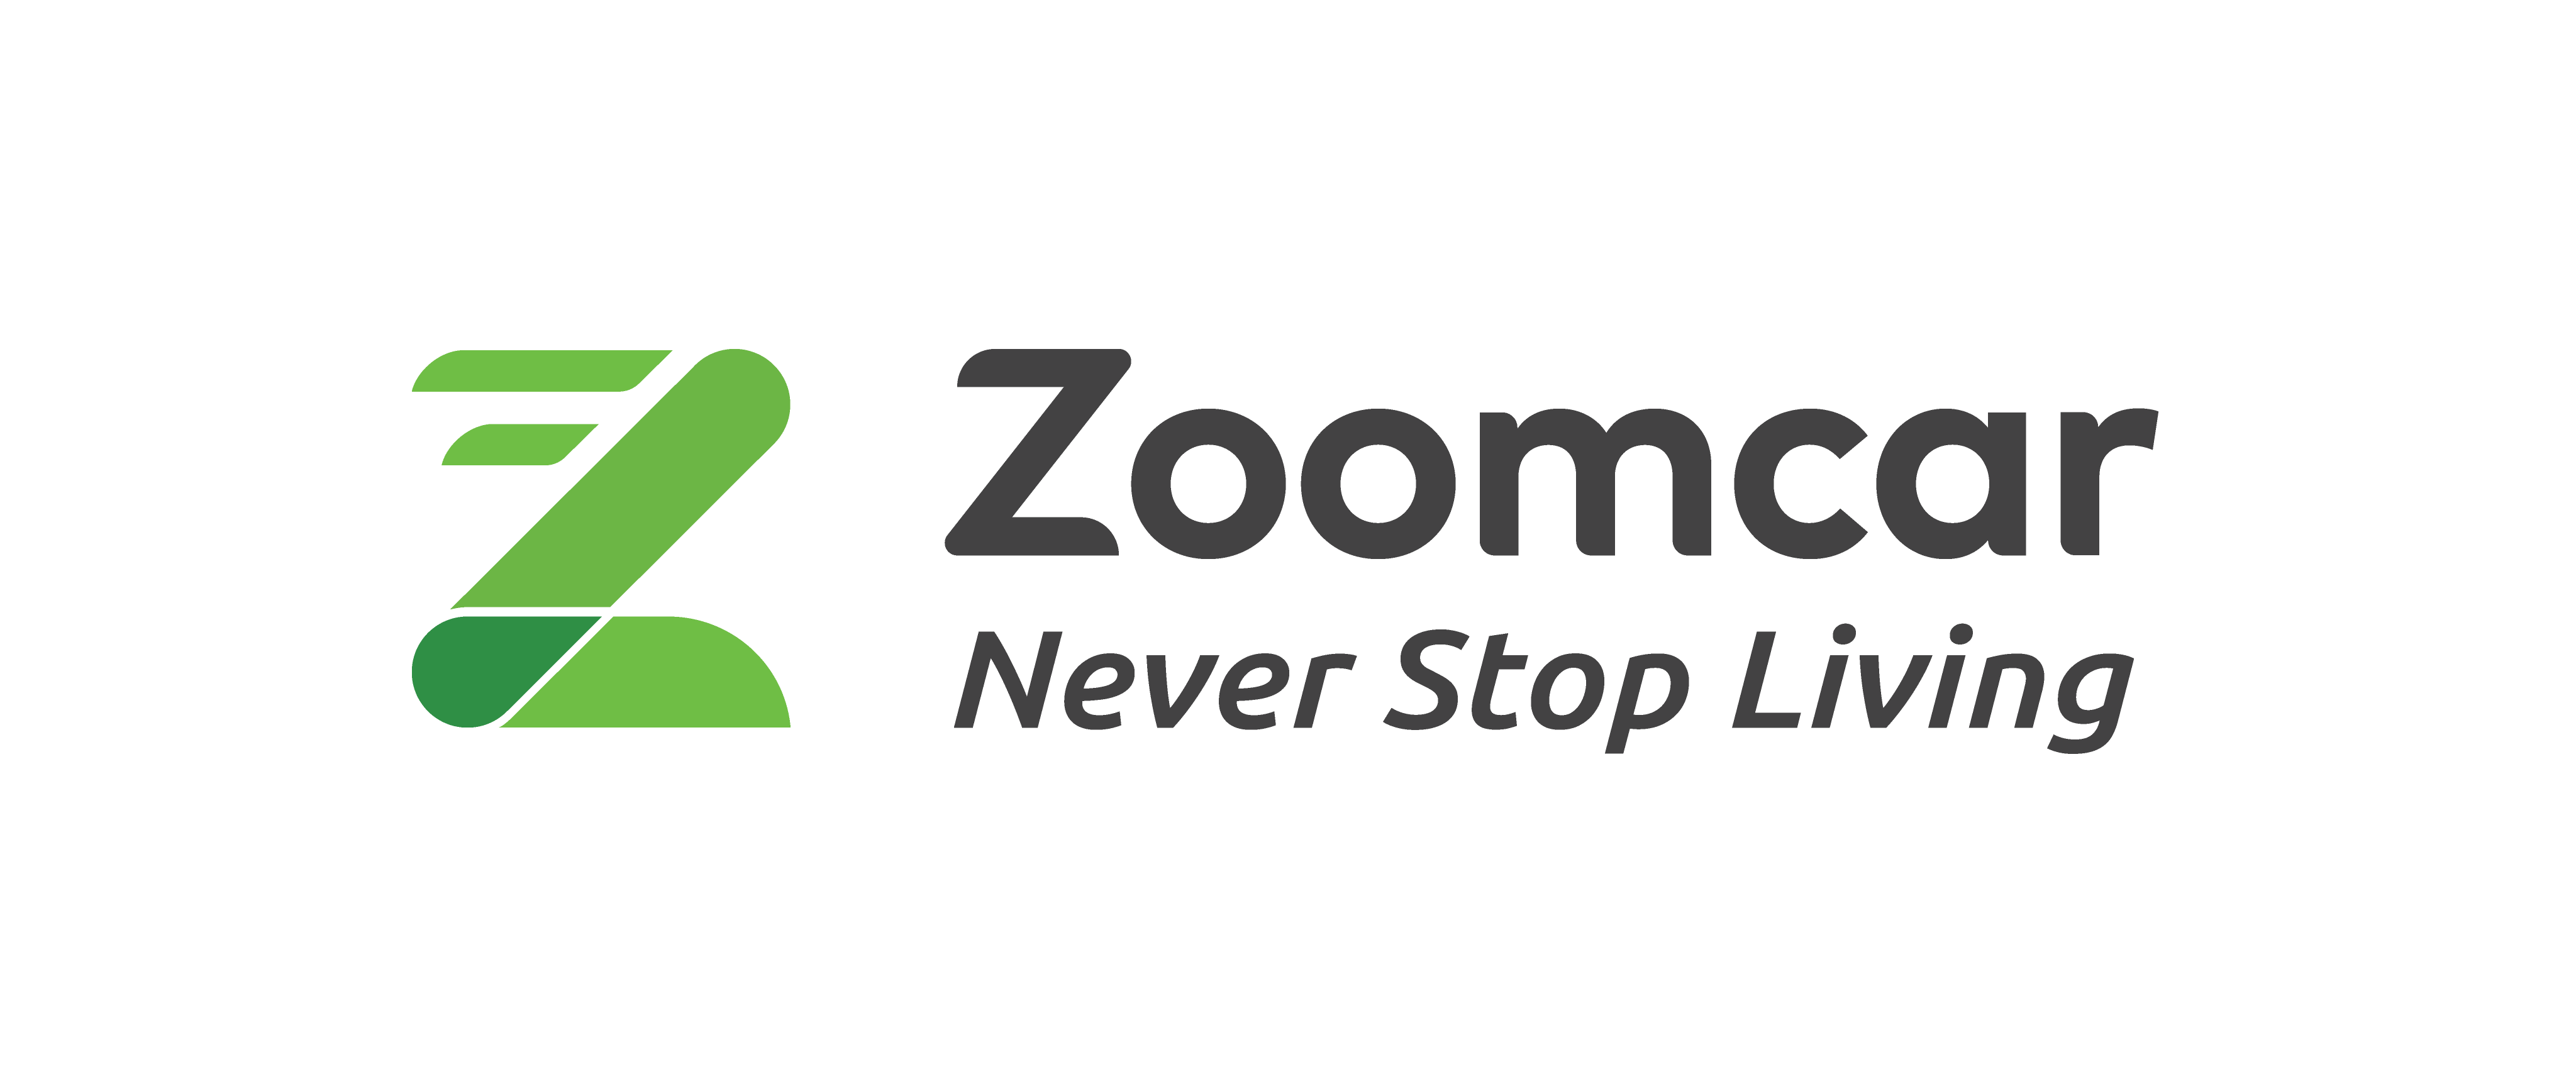 ZoomCar Coupons & Offers | Rs 2000 OFF Promo Codes